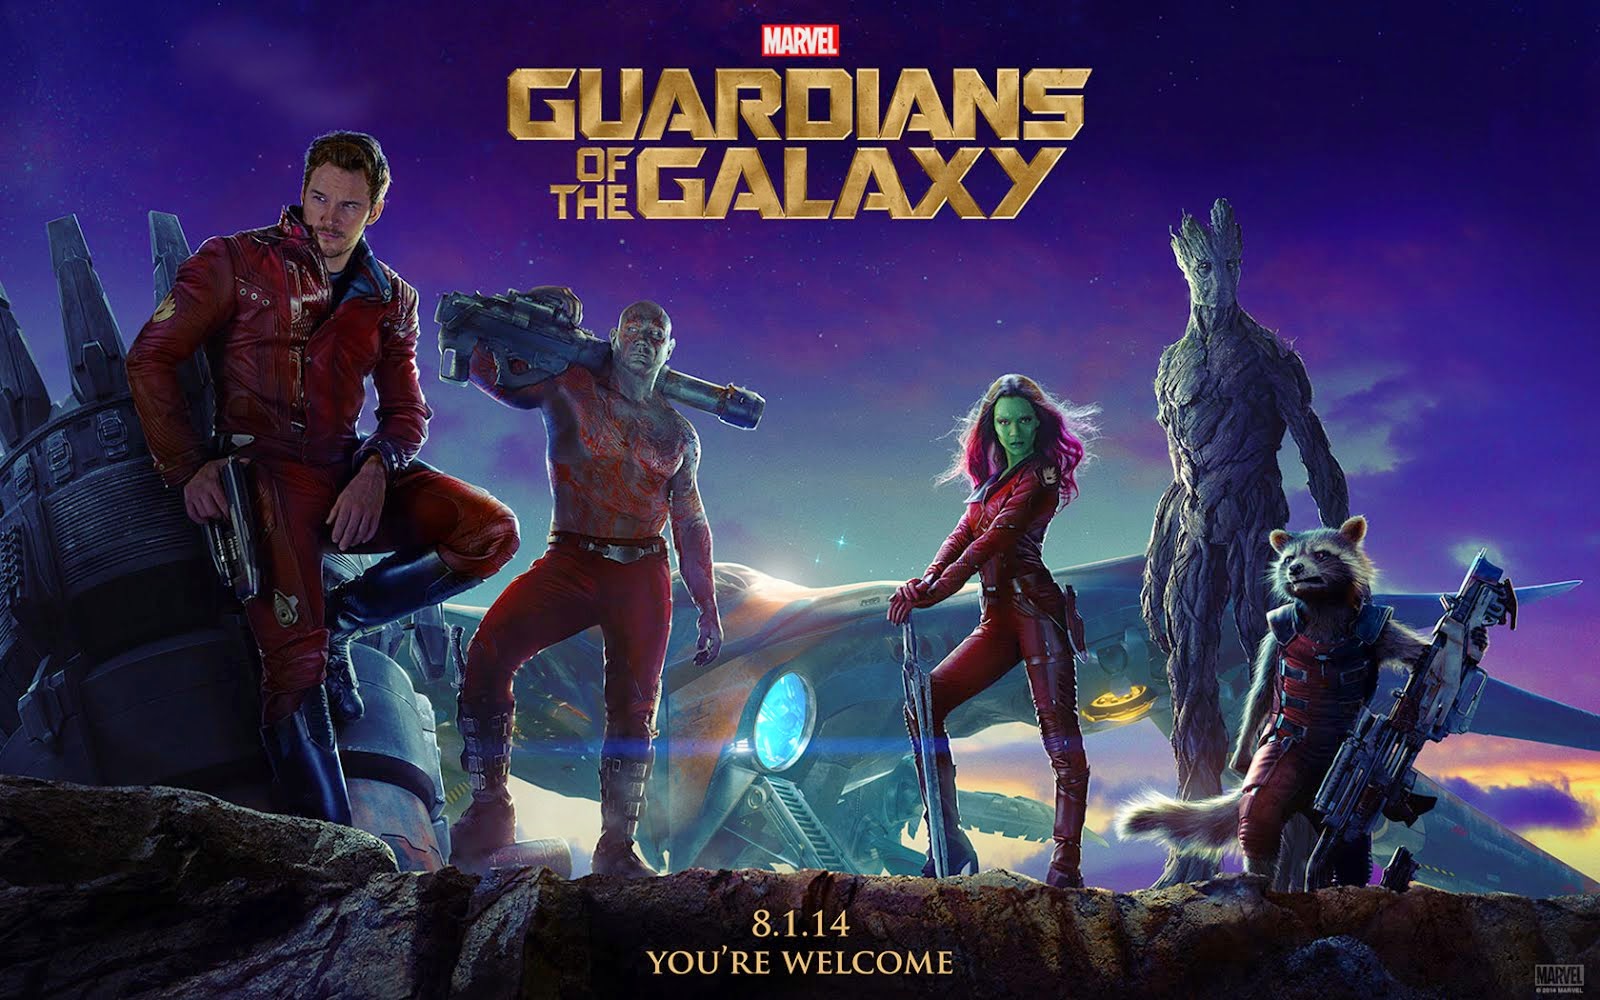 GUARDIANS OF THE GALAXY!!!